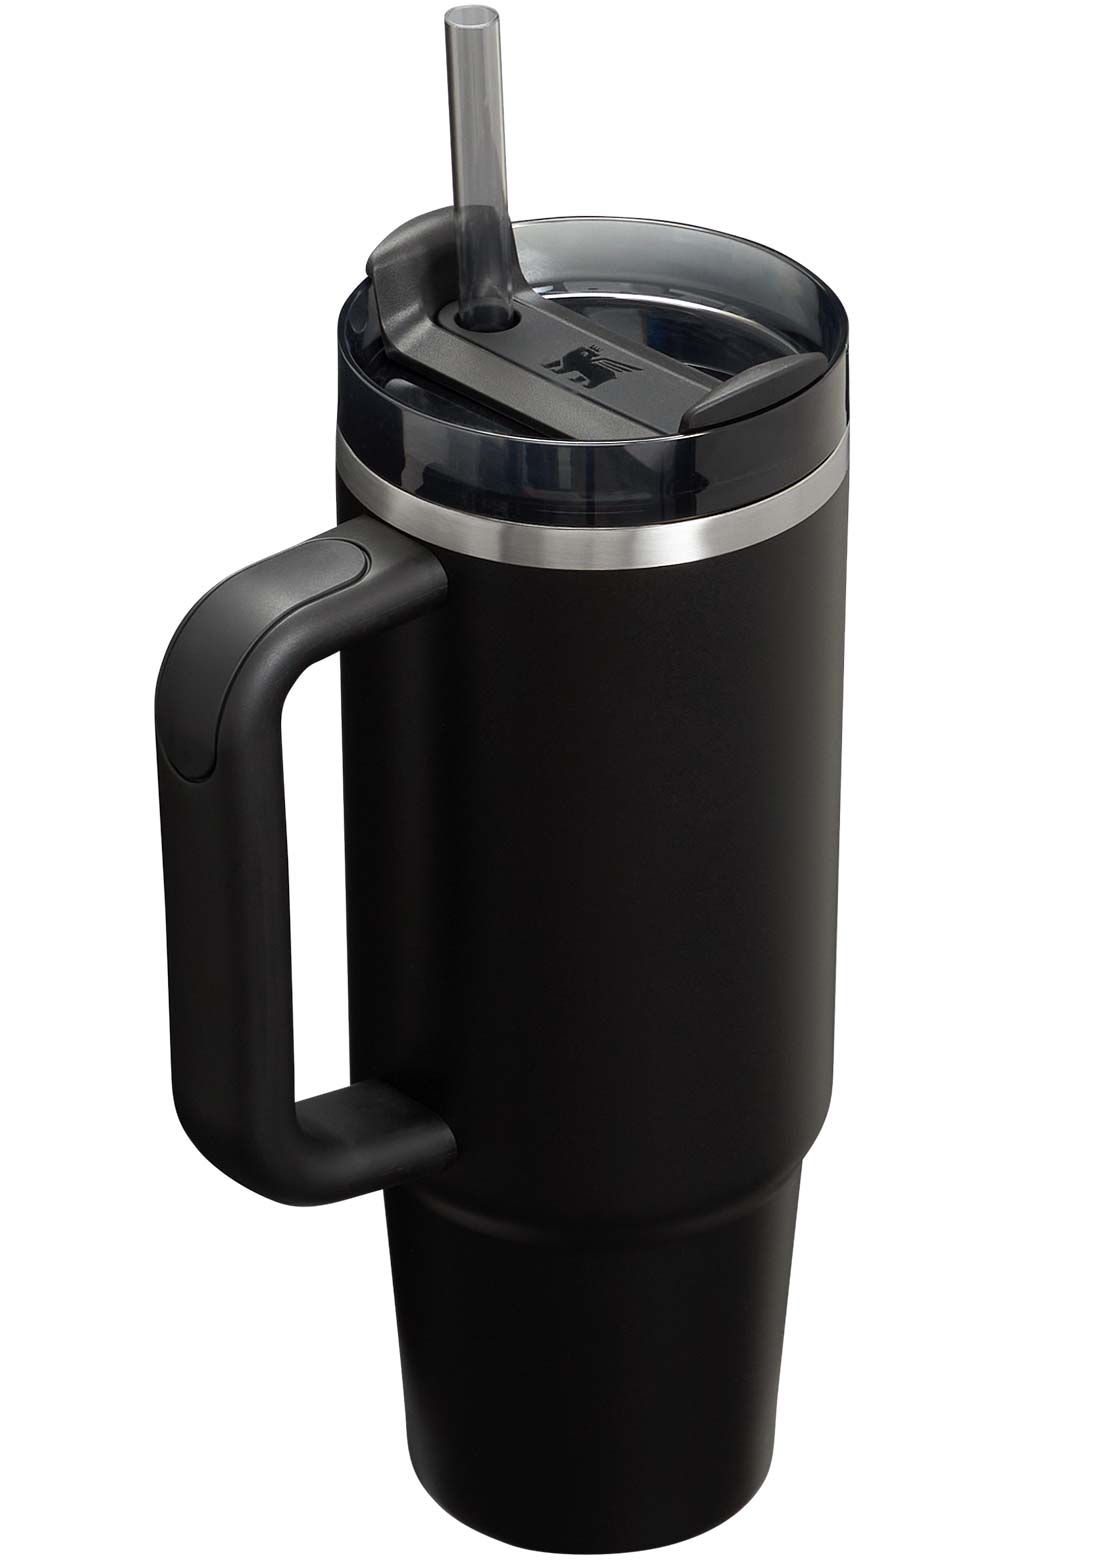 Stanley The Quencher H2.O FlowState Tumbler Black 2.0